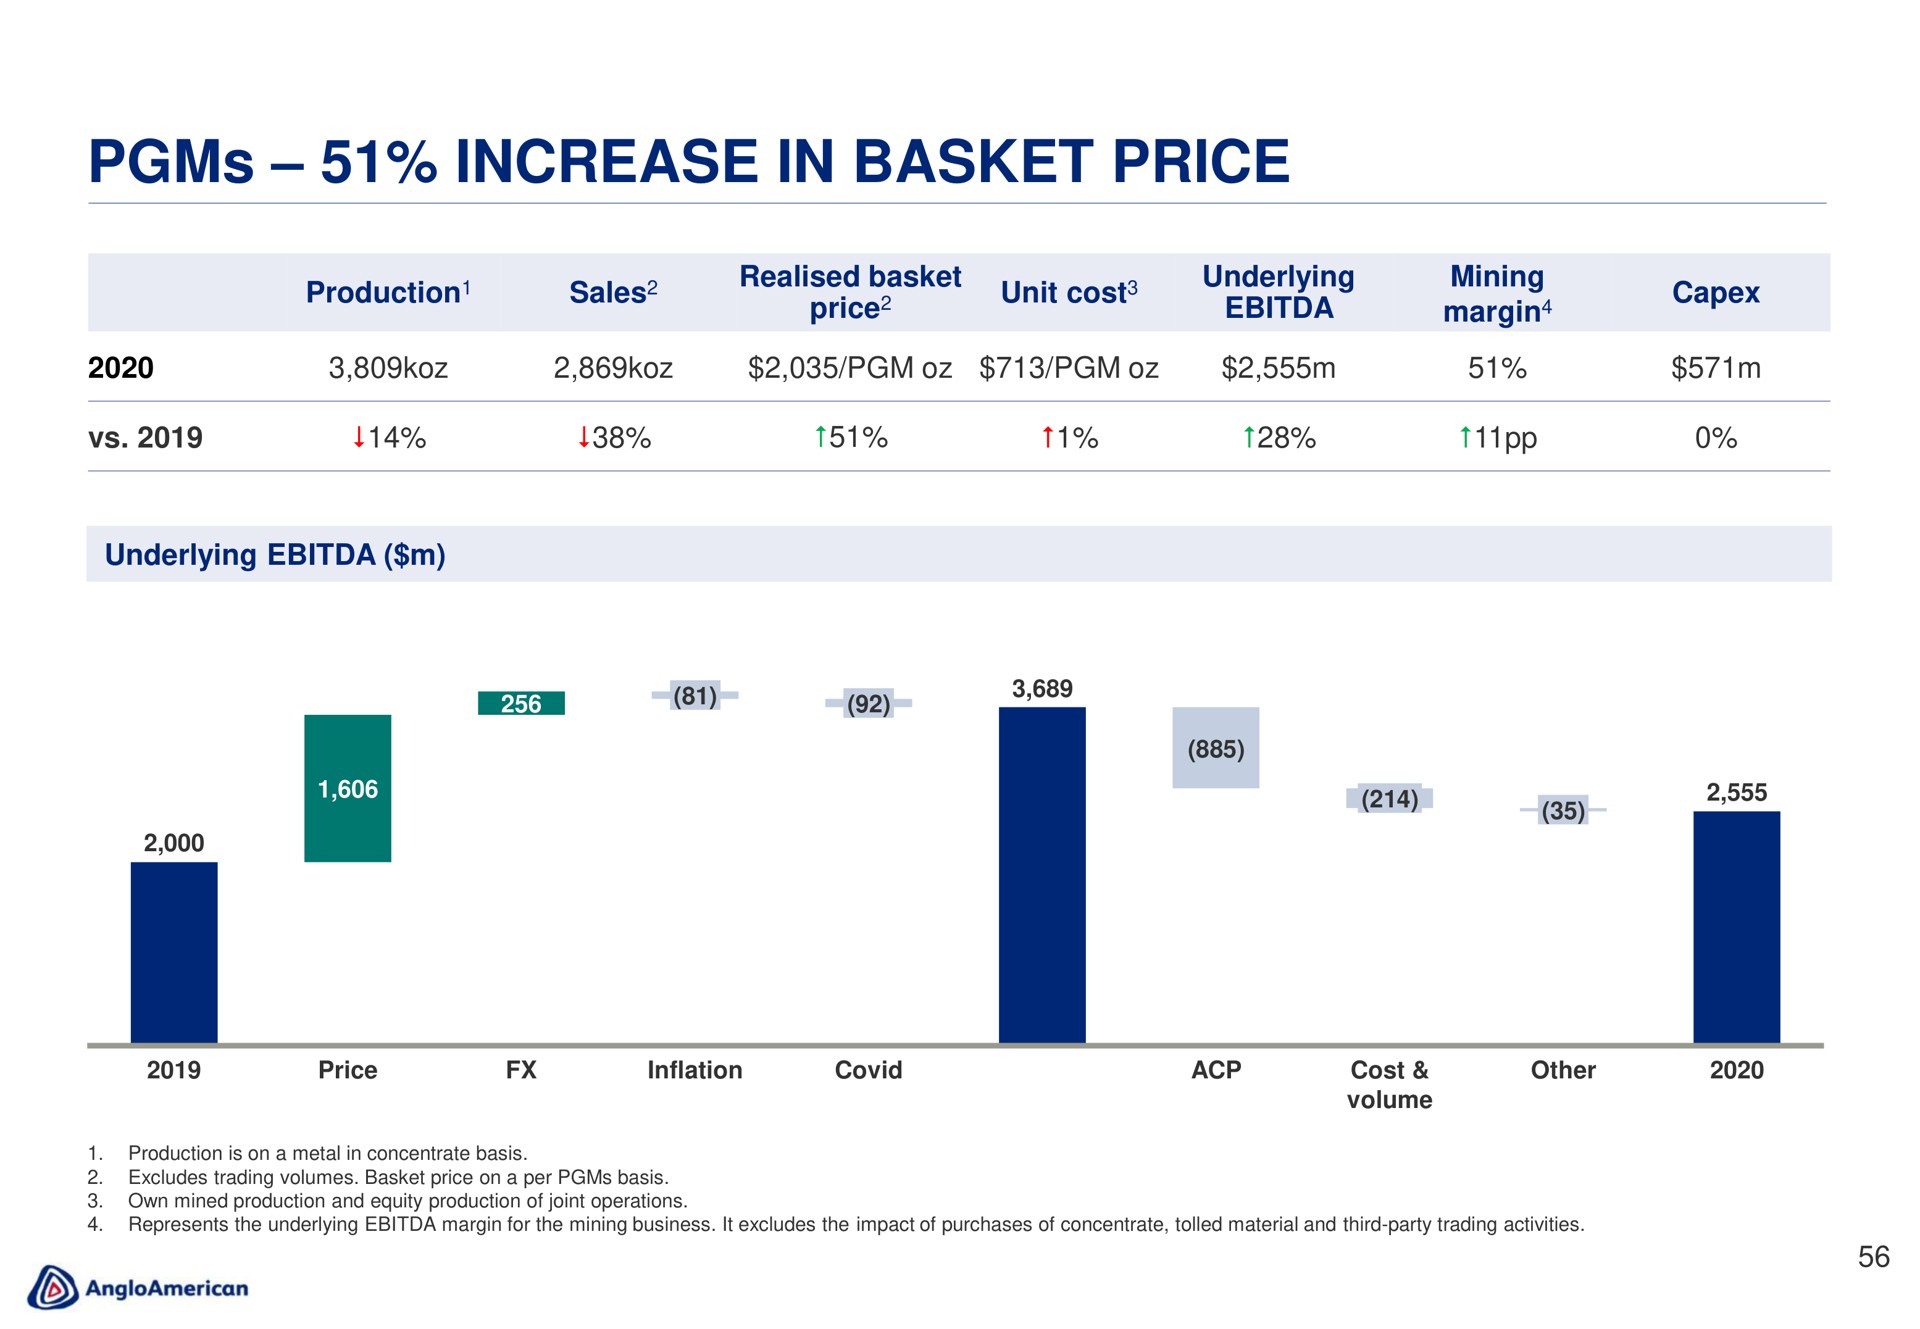 increase in basket price | AngloAmerican